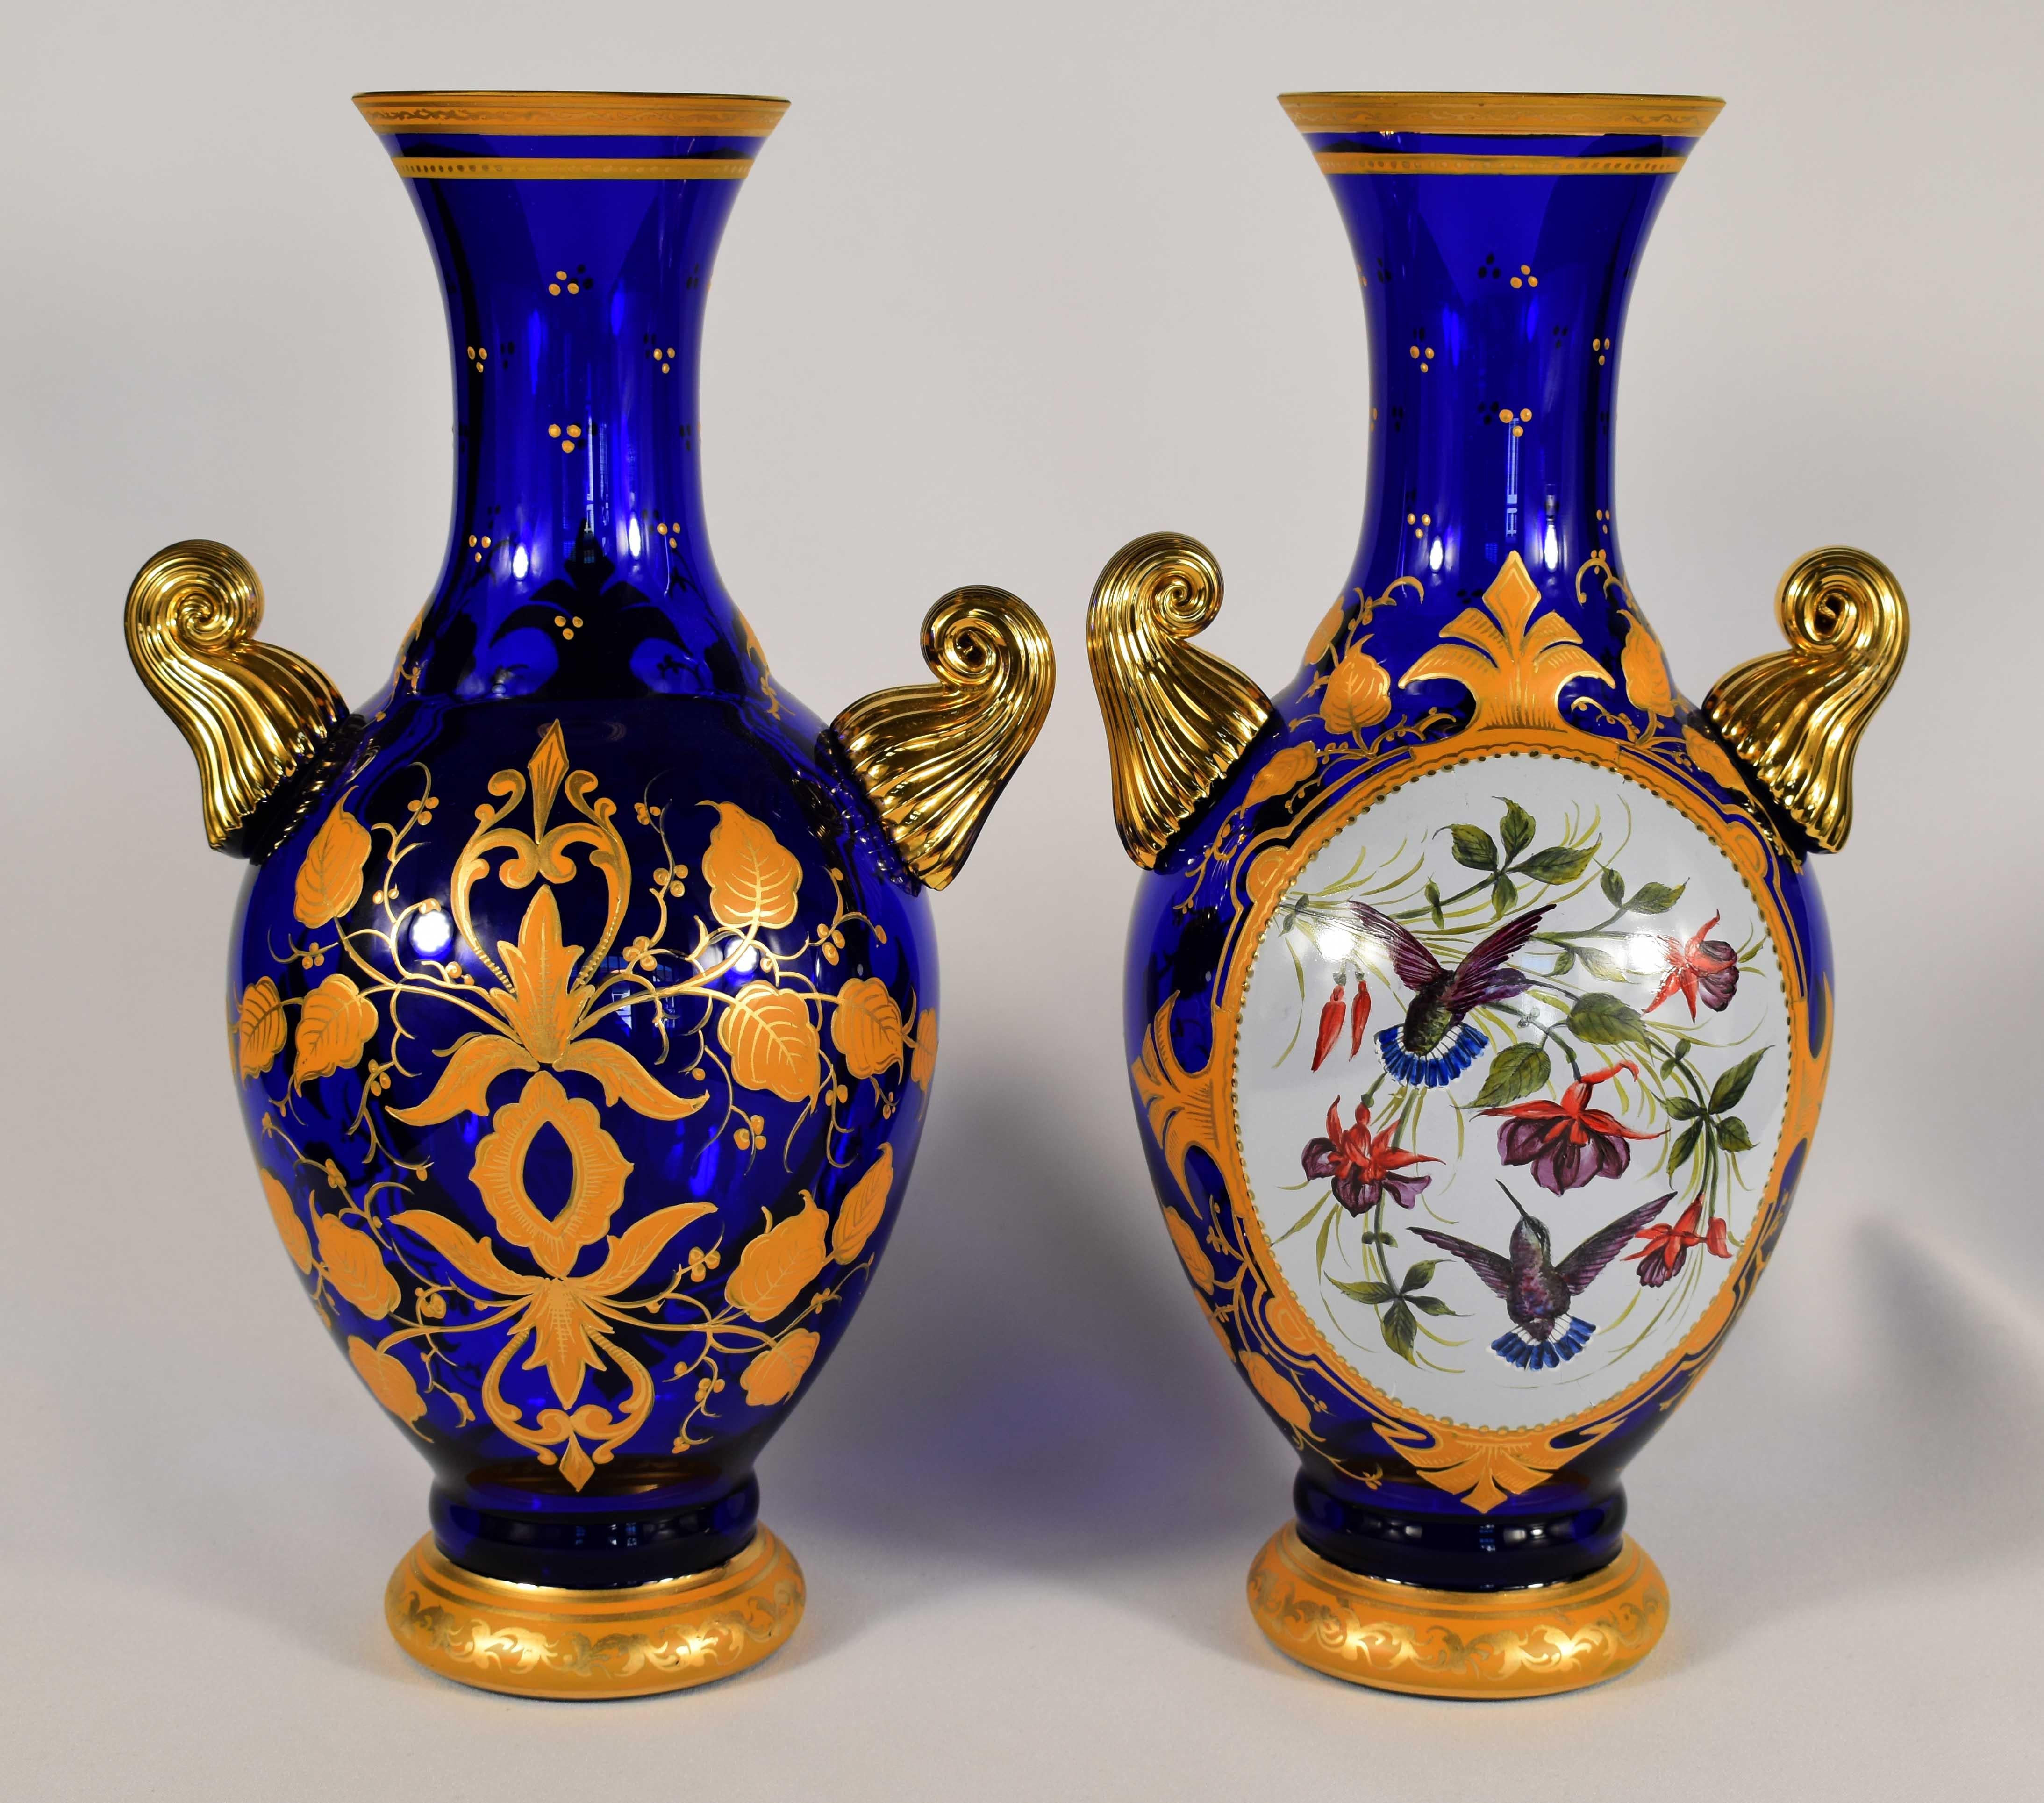 Pair of Blue Hand-Painted and Gilded Vases, Bohemian Glass 20h Century In Good Condition For Sale In Nový Bor, CZ